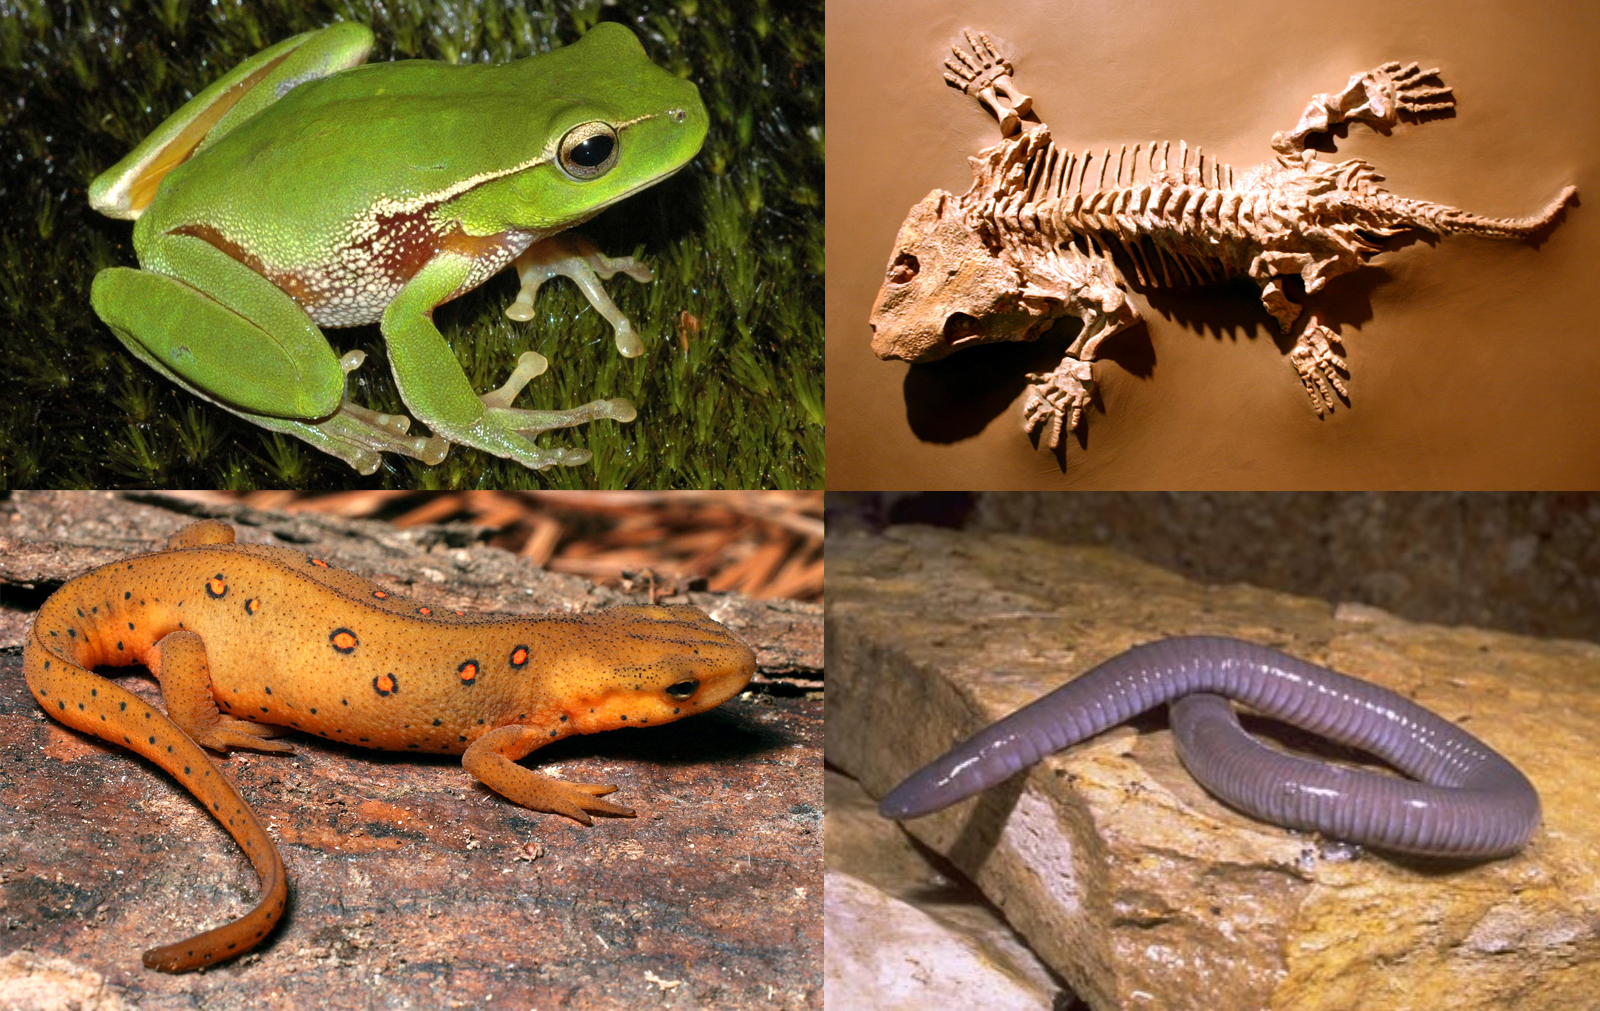 Diversity of amphibians: Clockwise from top right: Seymouria, Mexican burrowing caecilian, eastern newt and leaf green tree frog.